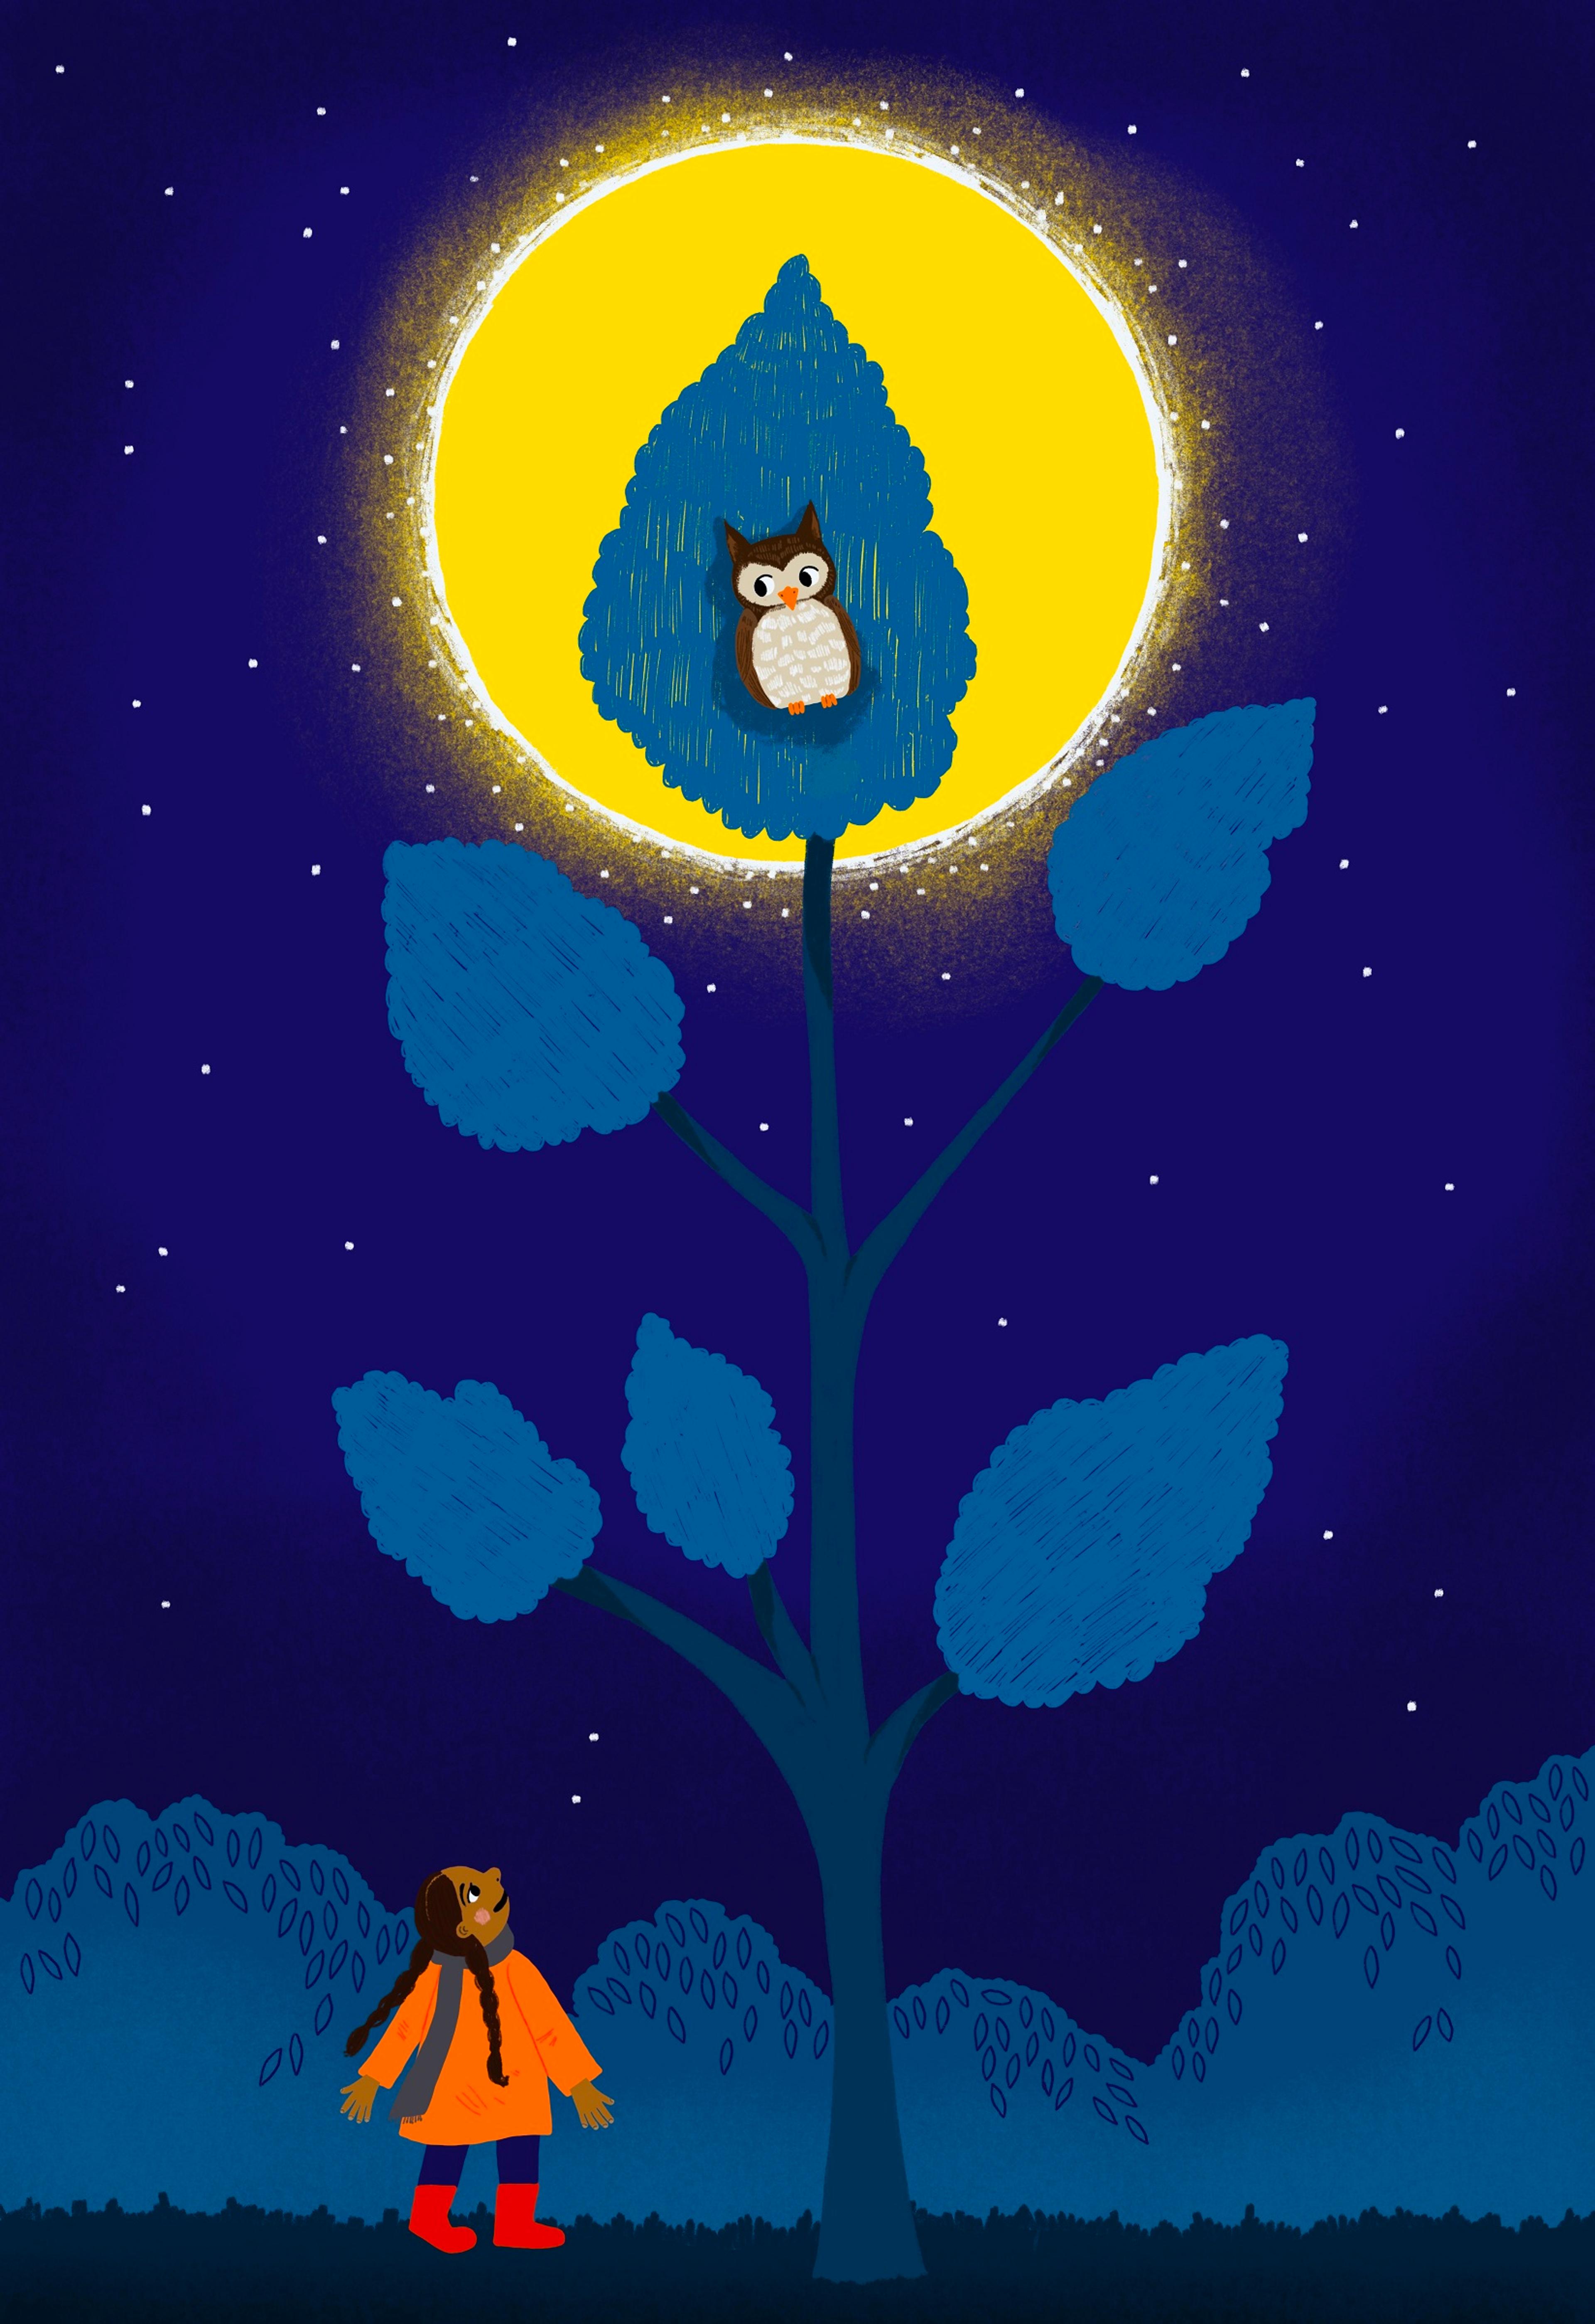 Illustration of a child looking up at an owl in a tree, silhouetted by the moon